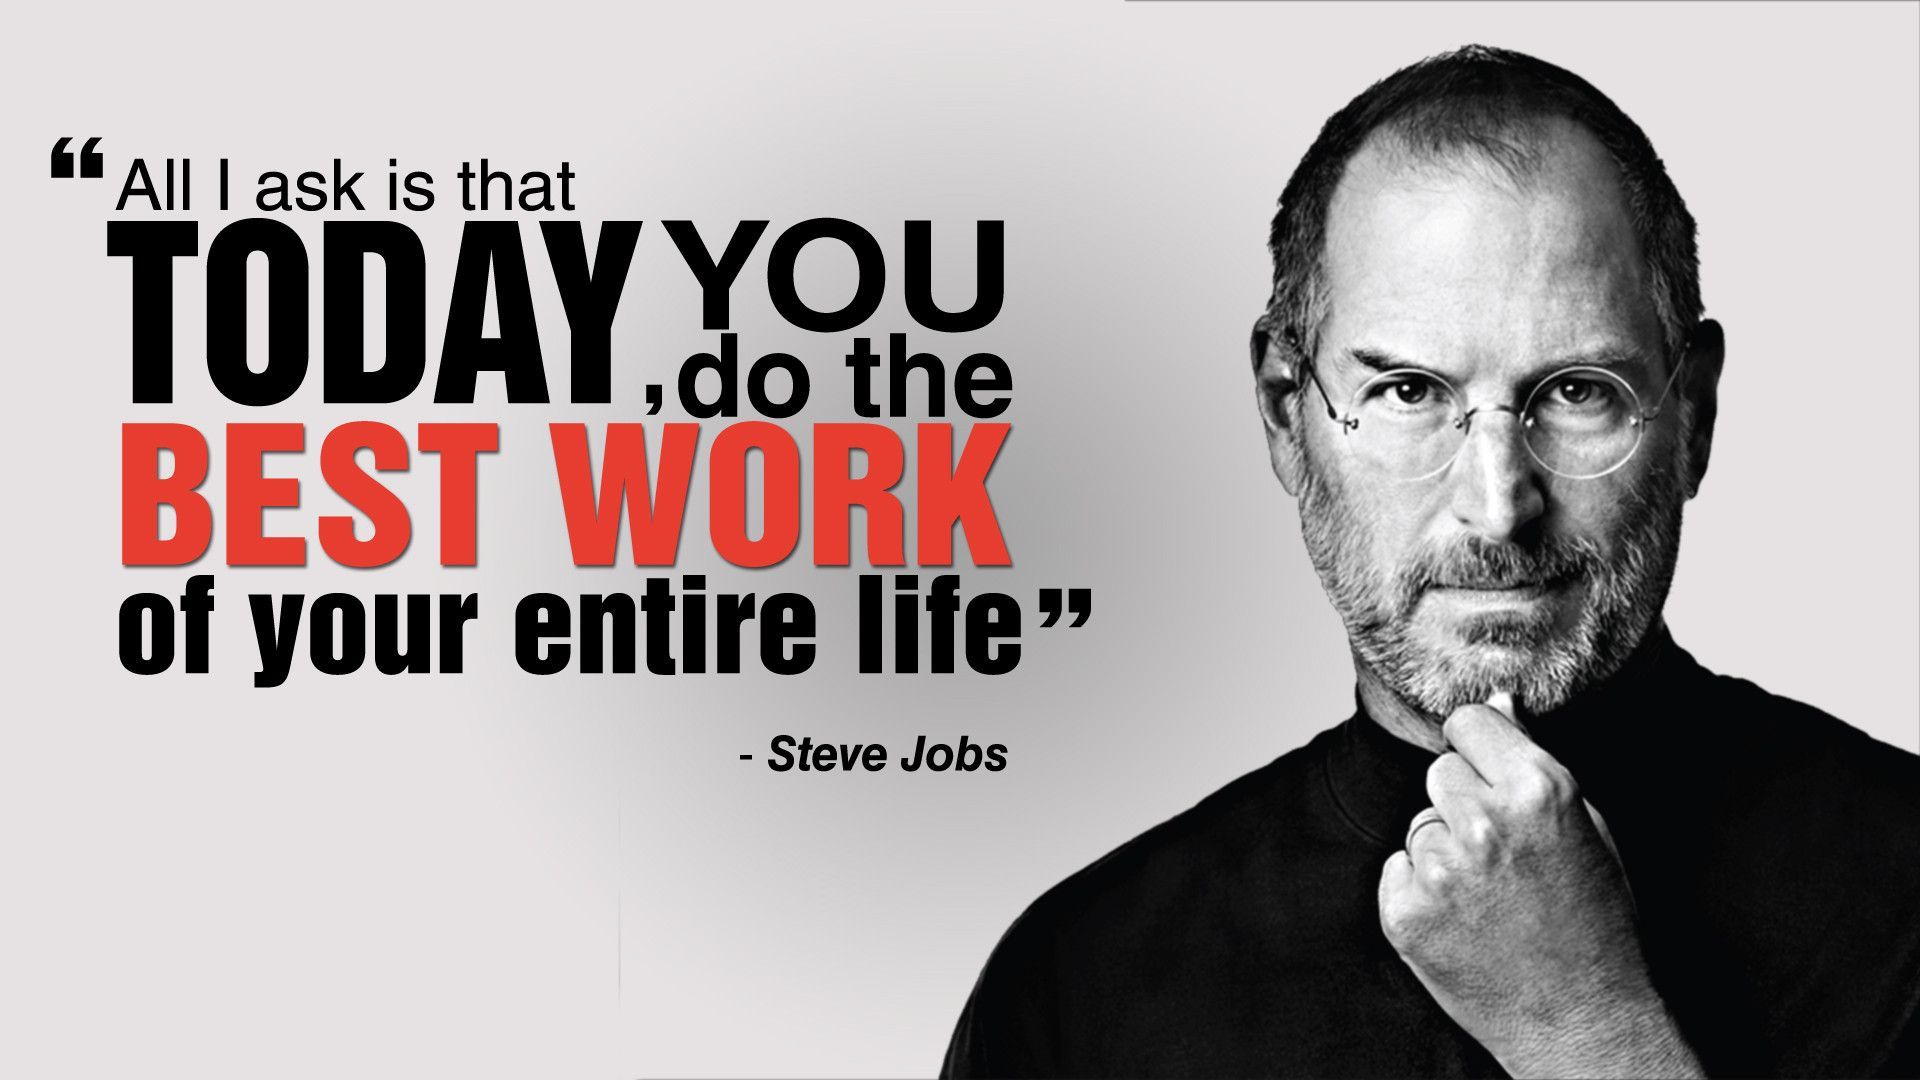 Steve Jobs- Push the perfection beyond limits